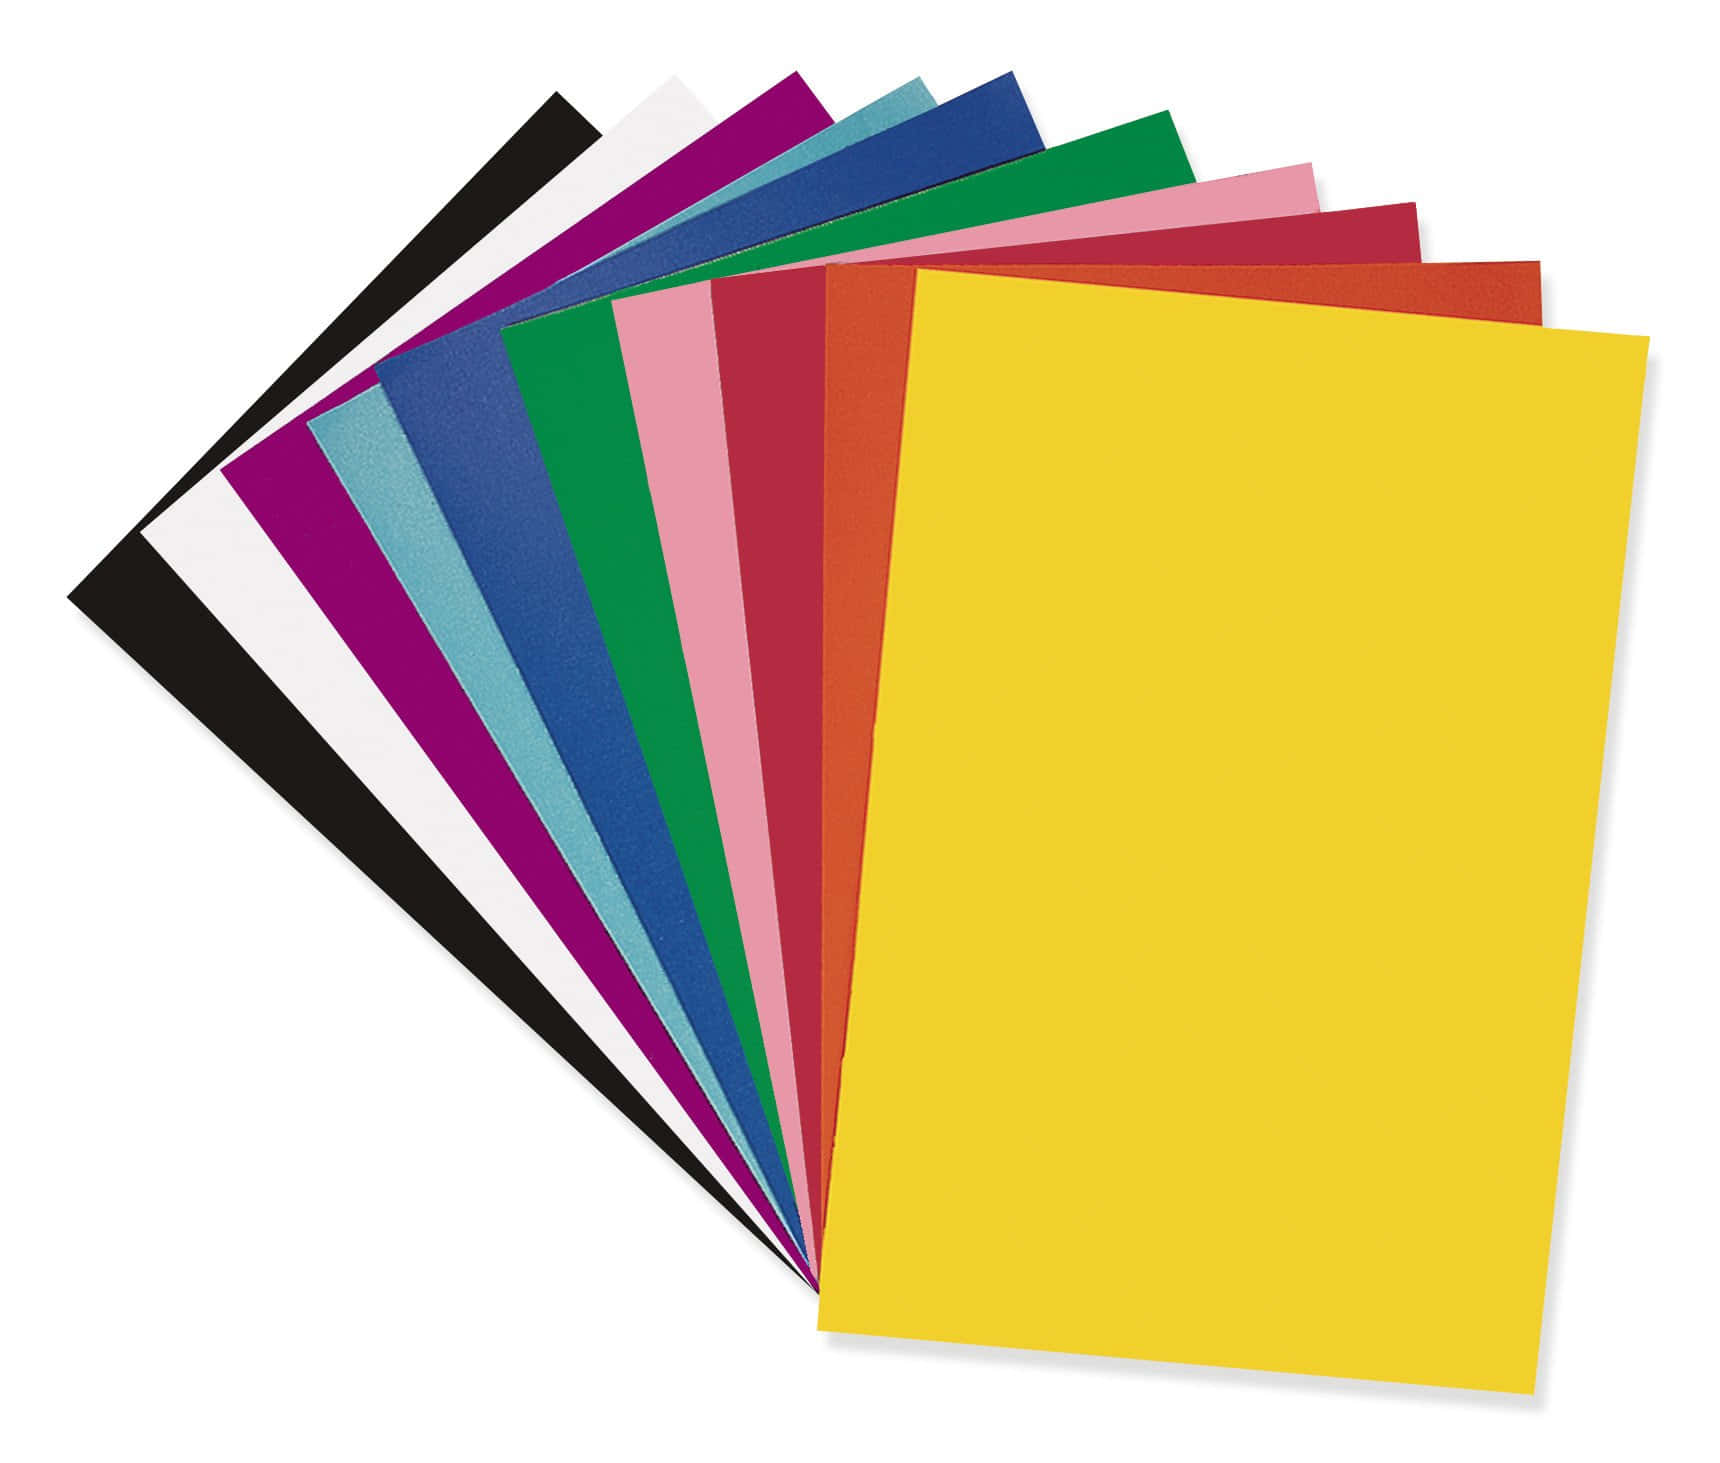 Blank Poster Board - A Great Canvas for Your Creative Projects